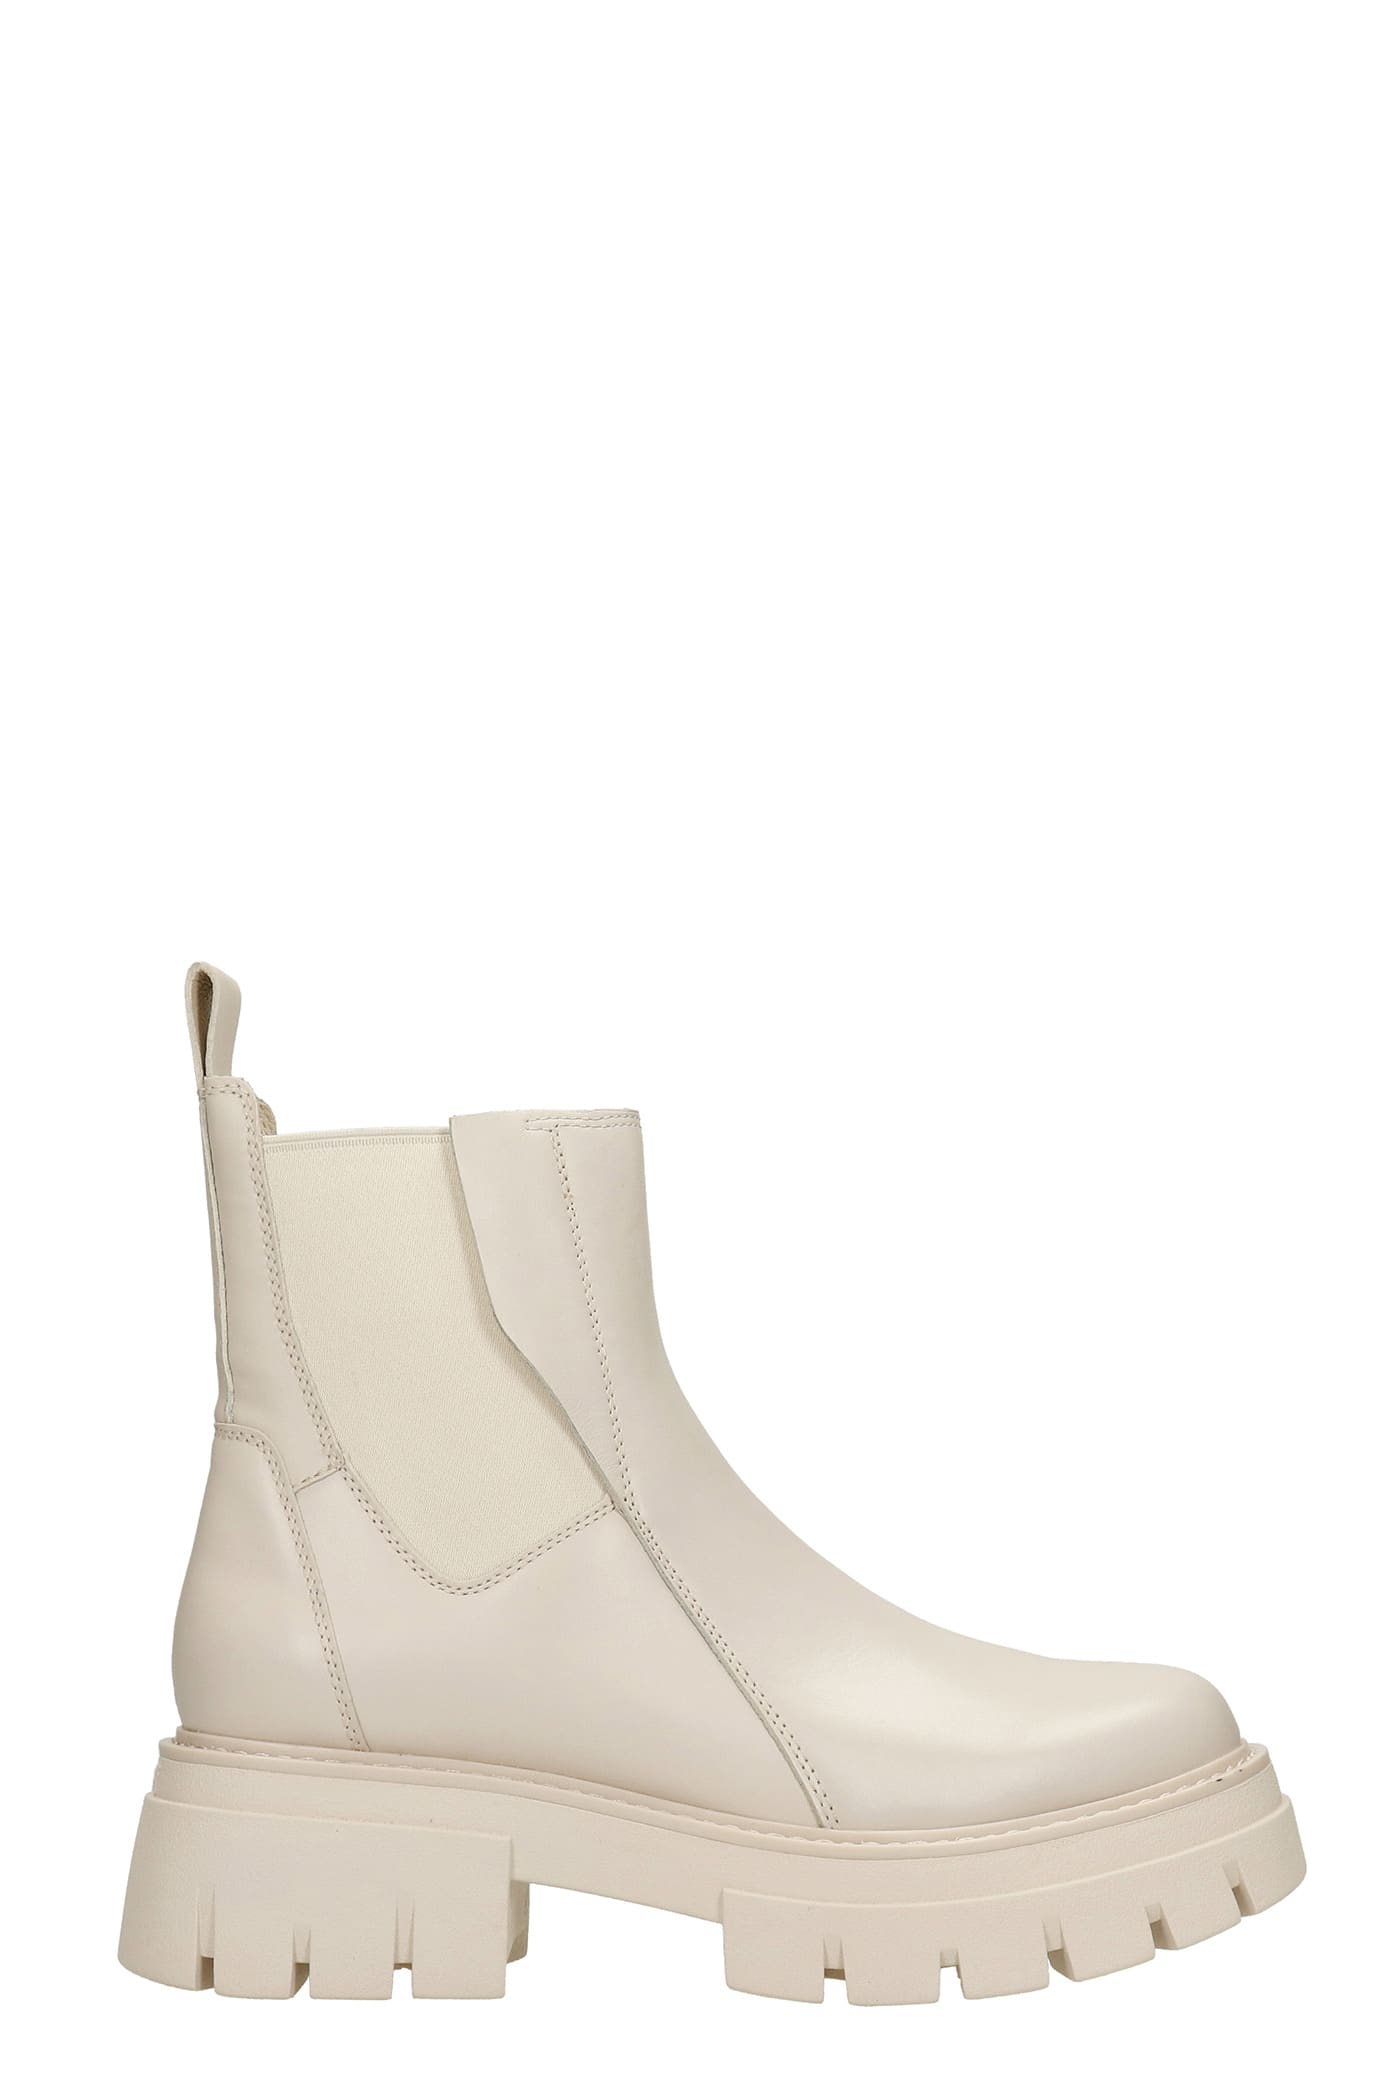 Ash Links Combat Boots In White Leather